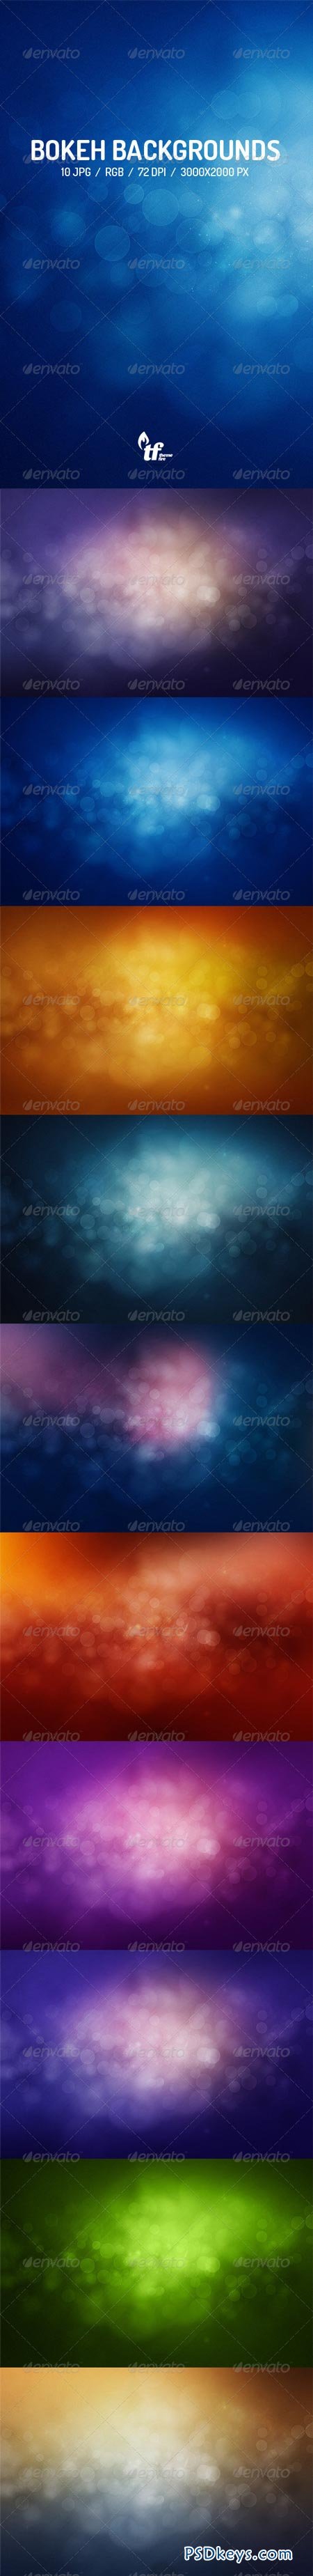 Abstract Bokeh Backgrounds 7691639